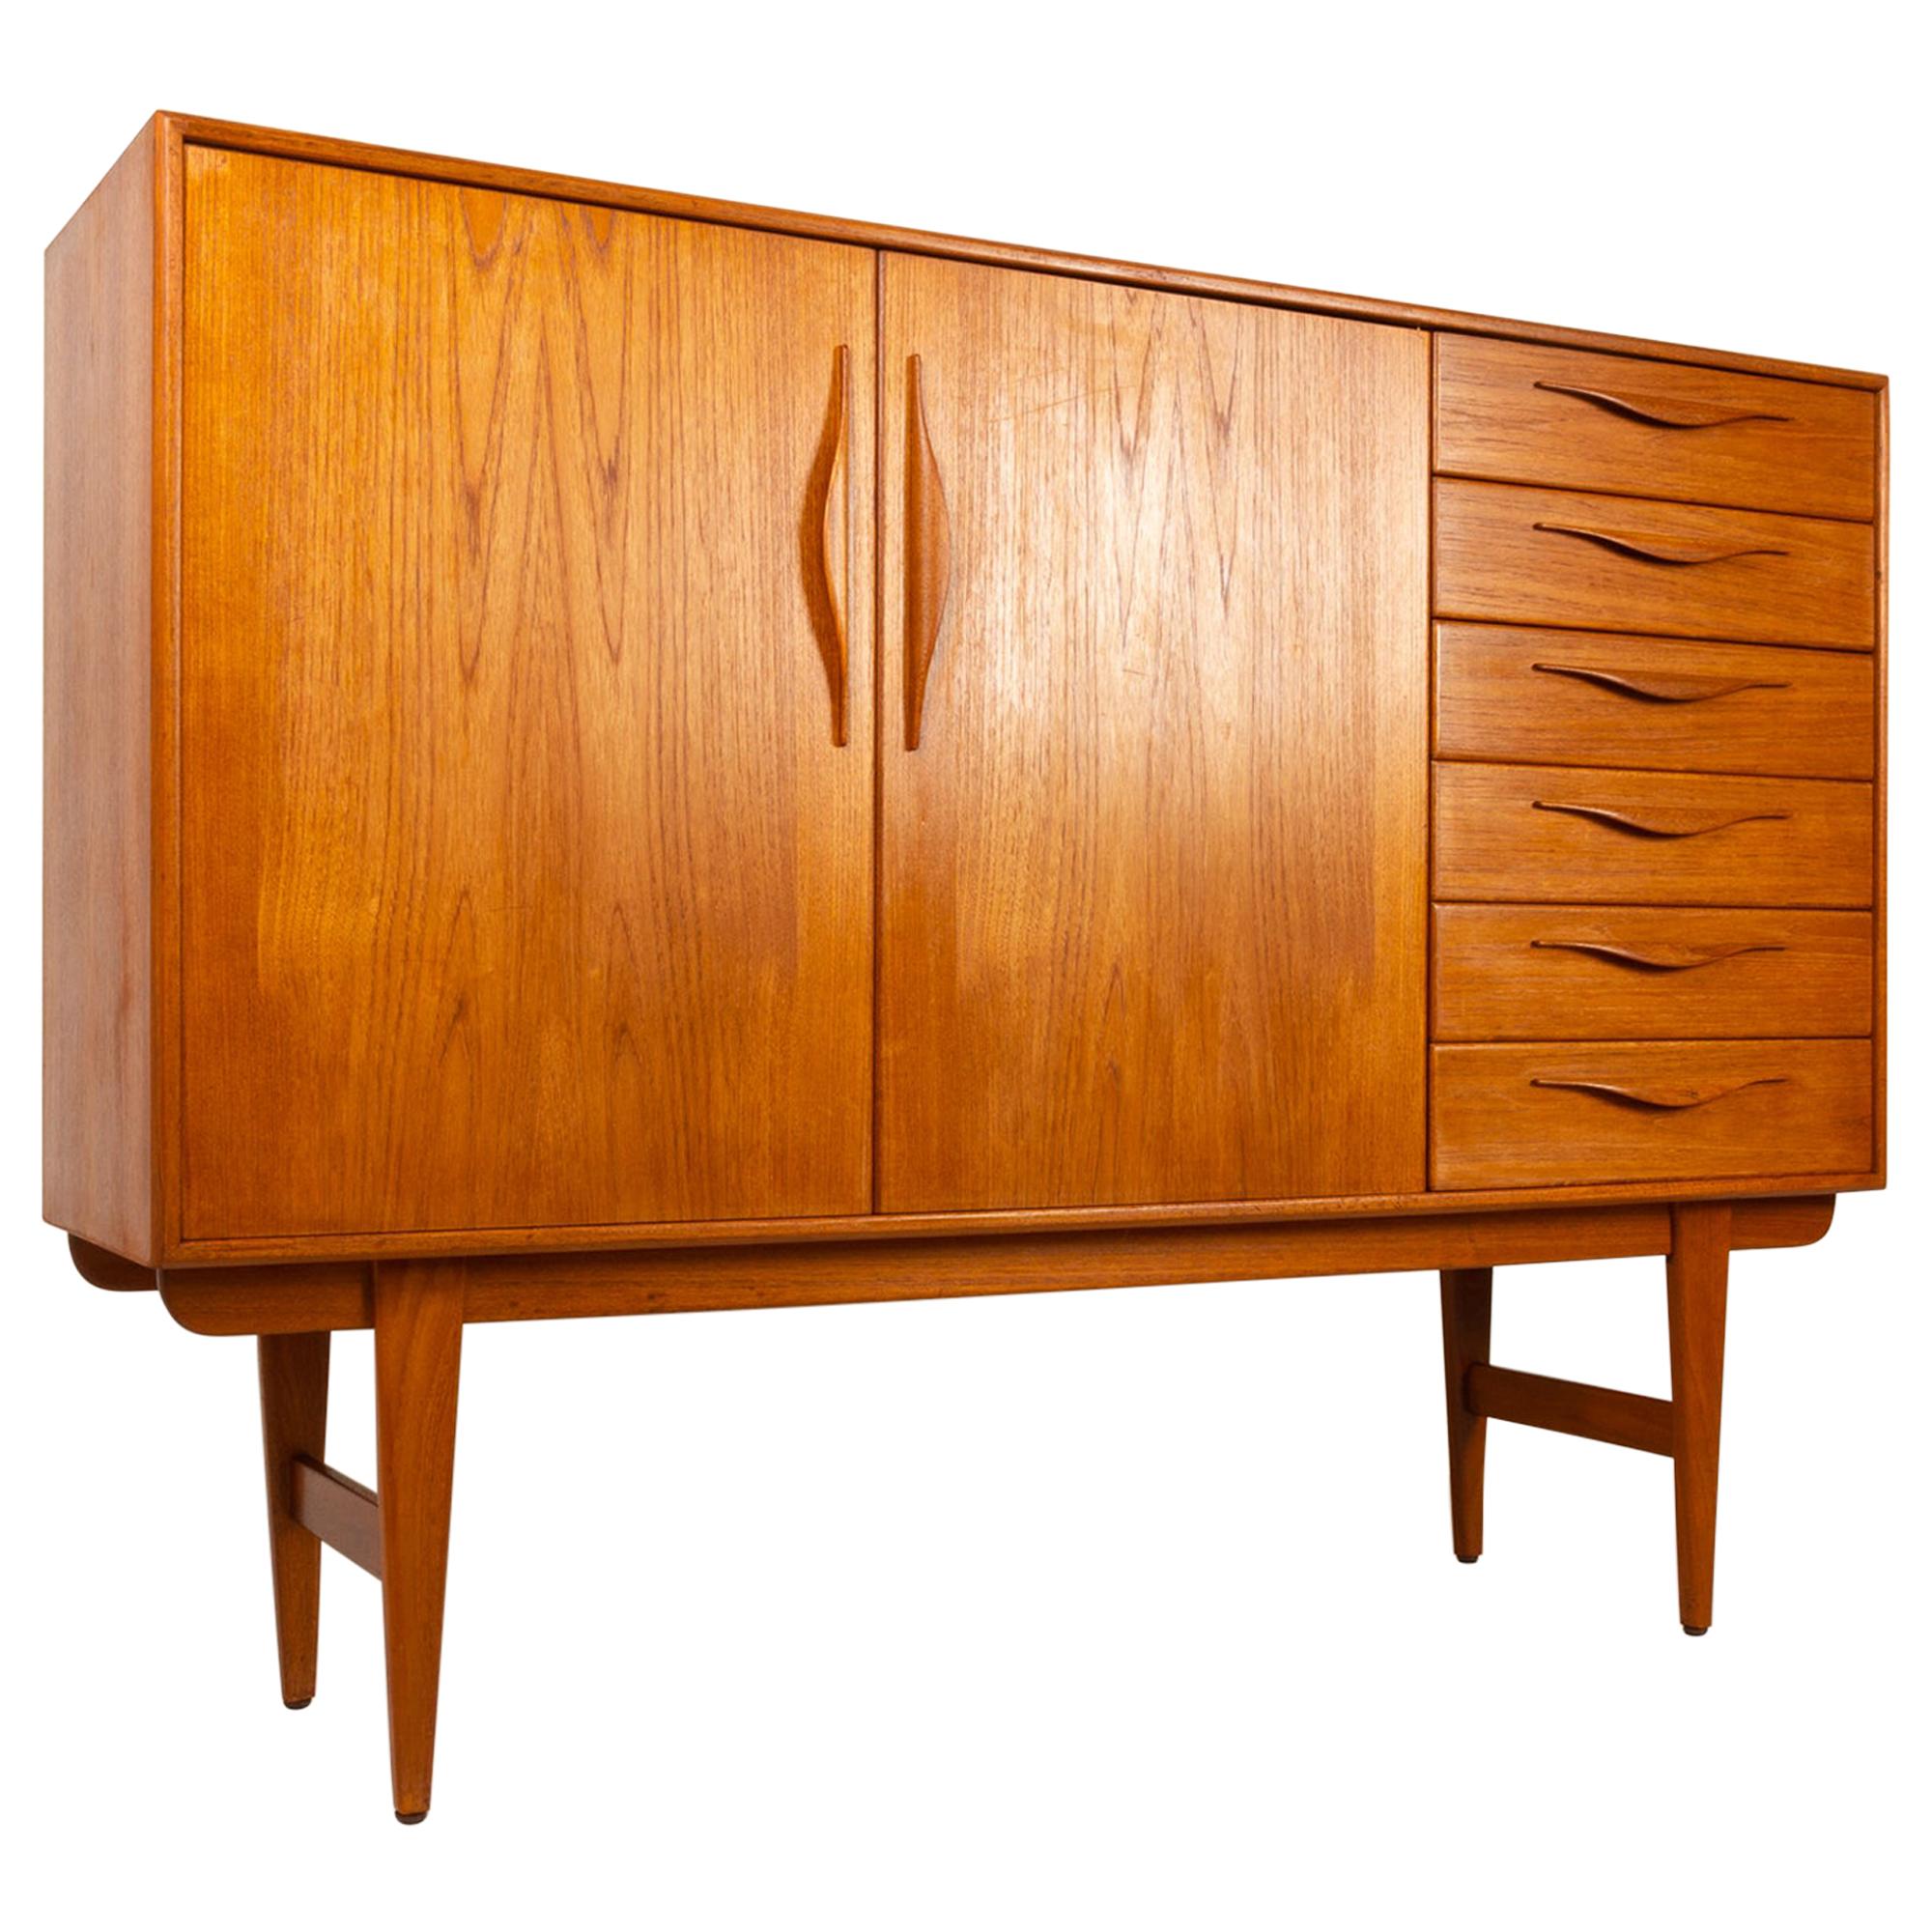 Vintage Danish Tall Teak Sideboard with 6 Drawers, 1960s